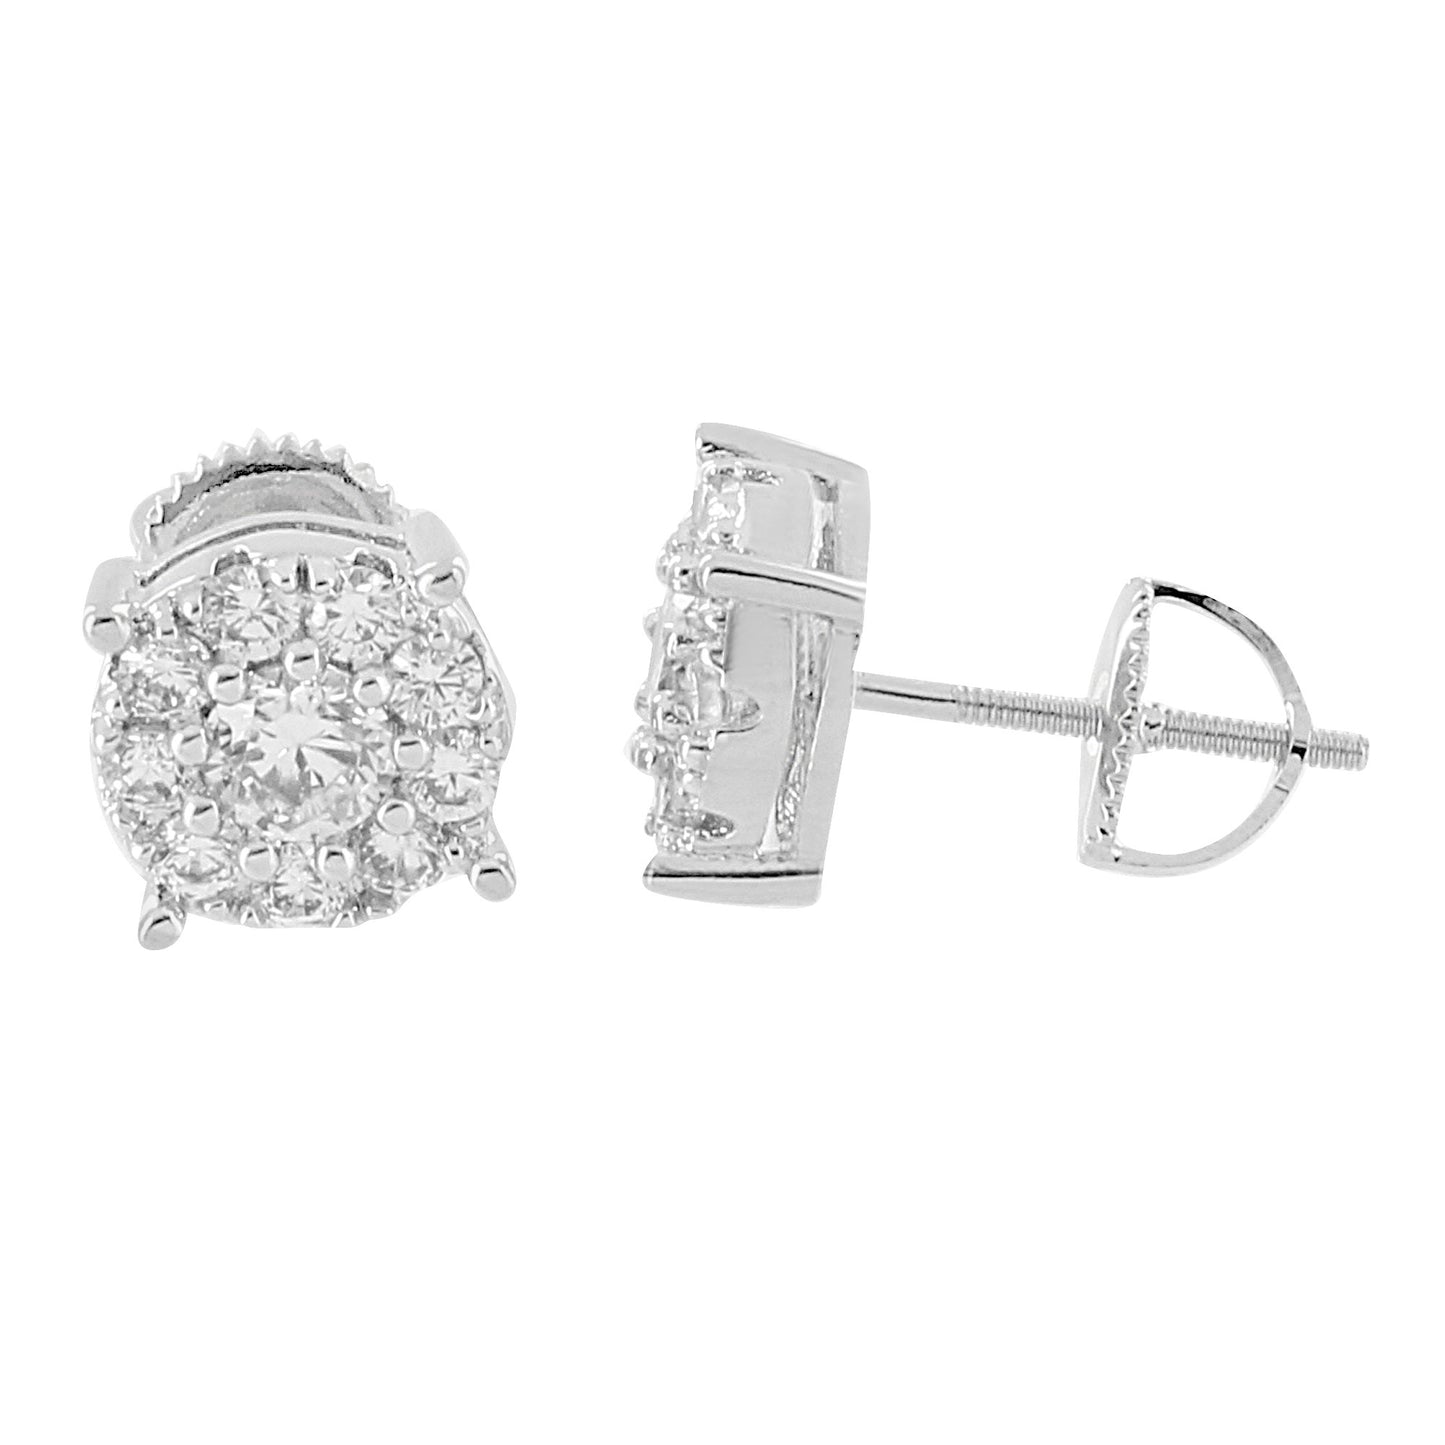 Solitaire Earrings 14K White Gold Finish Studs Cluster Set Lab Diamonds Screw On Studs